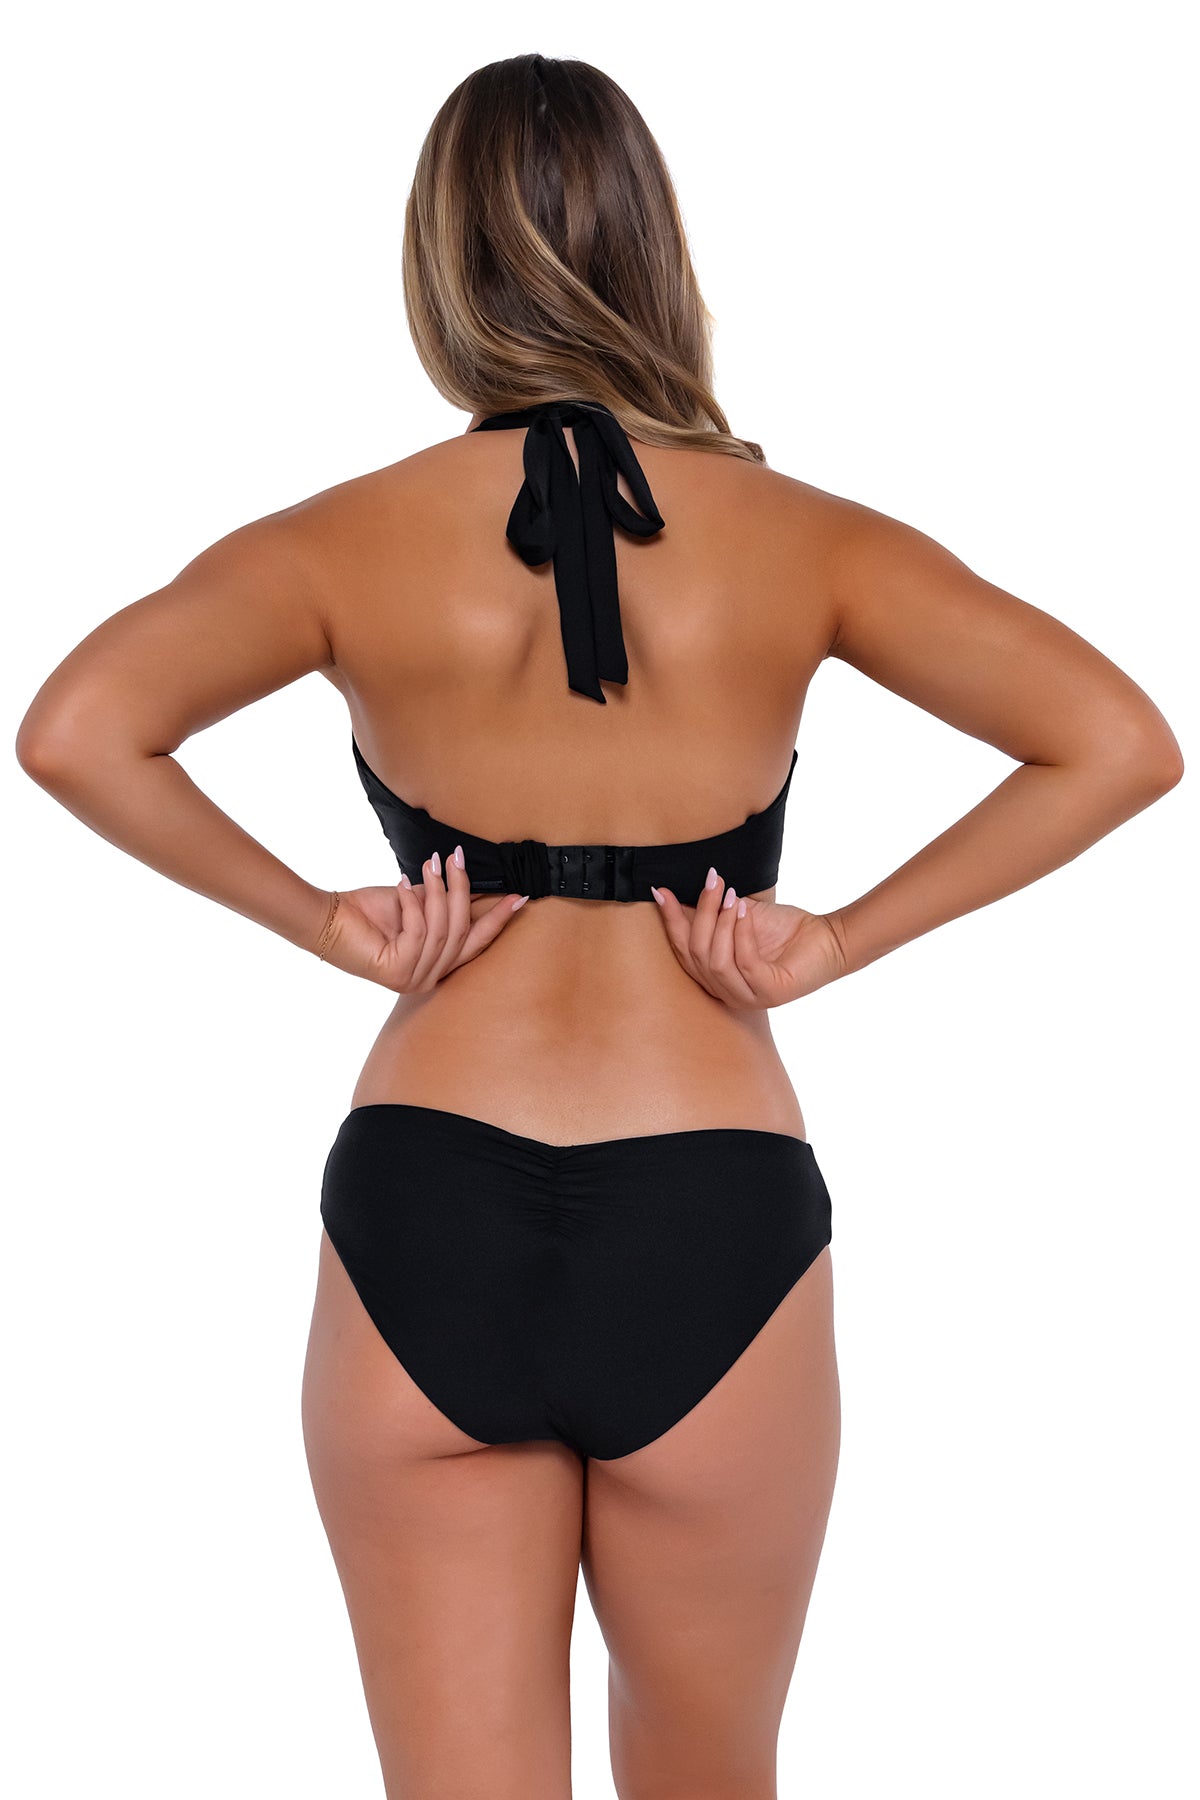 Back pose #1 of Taylor wearing Sunsets Black Vienna V-Wire Top showing hidden hook-and-eye closure with matching Alana Reversible Hipster bikini bottom